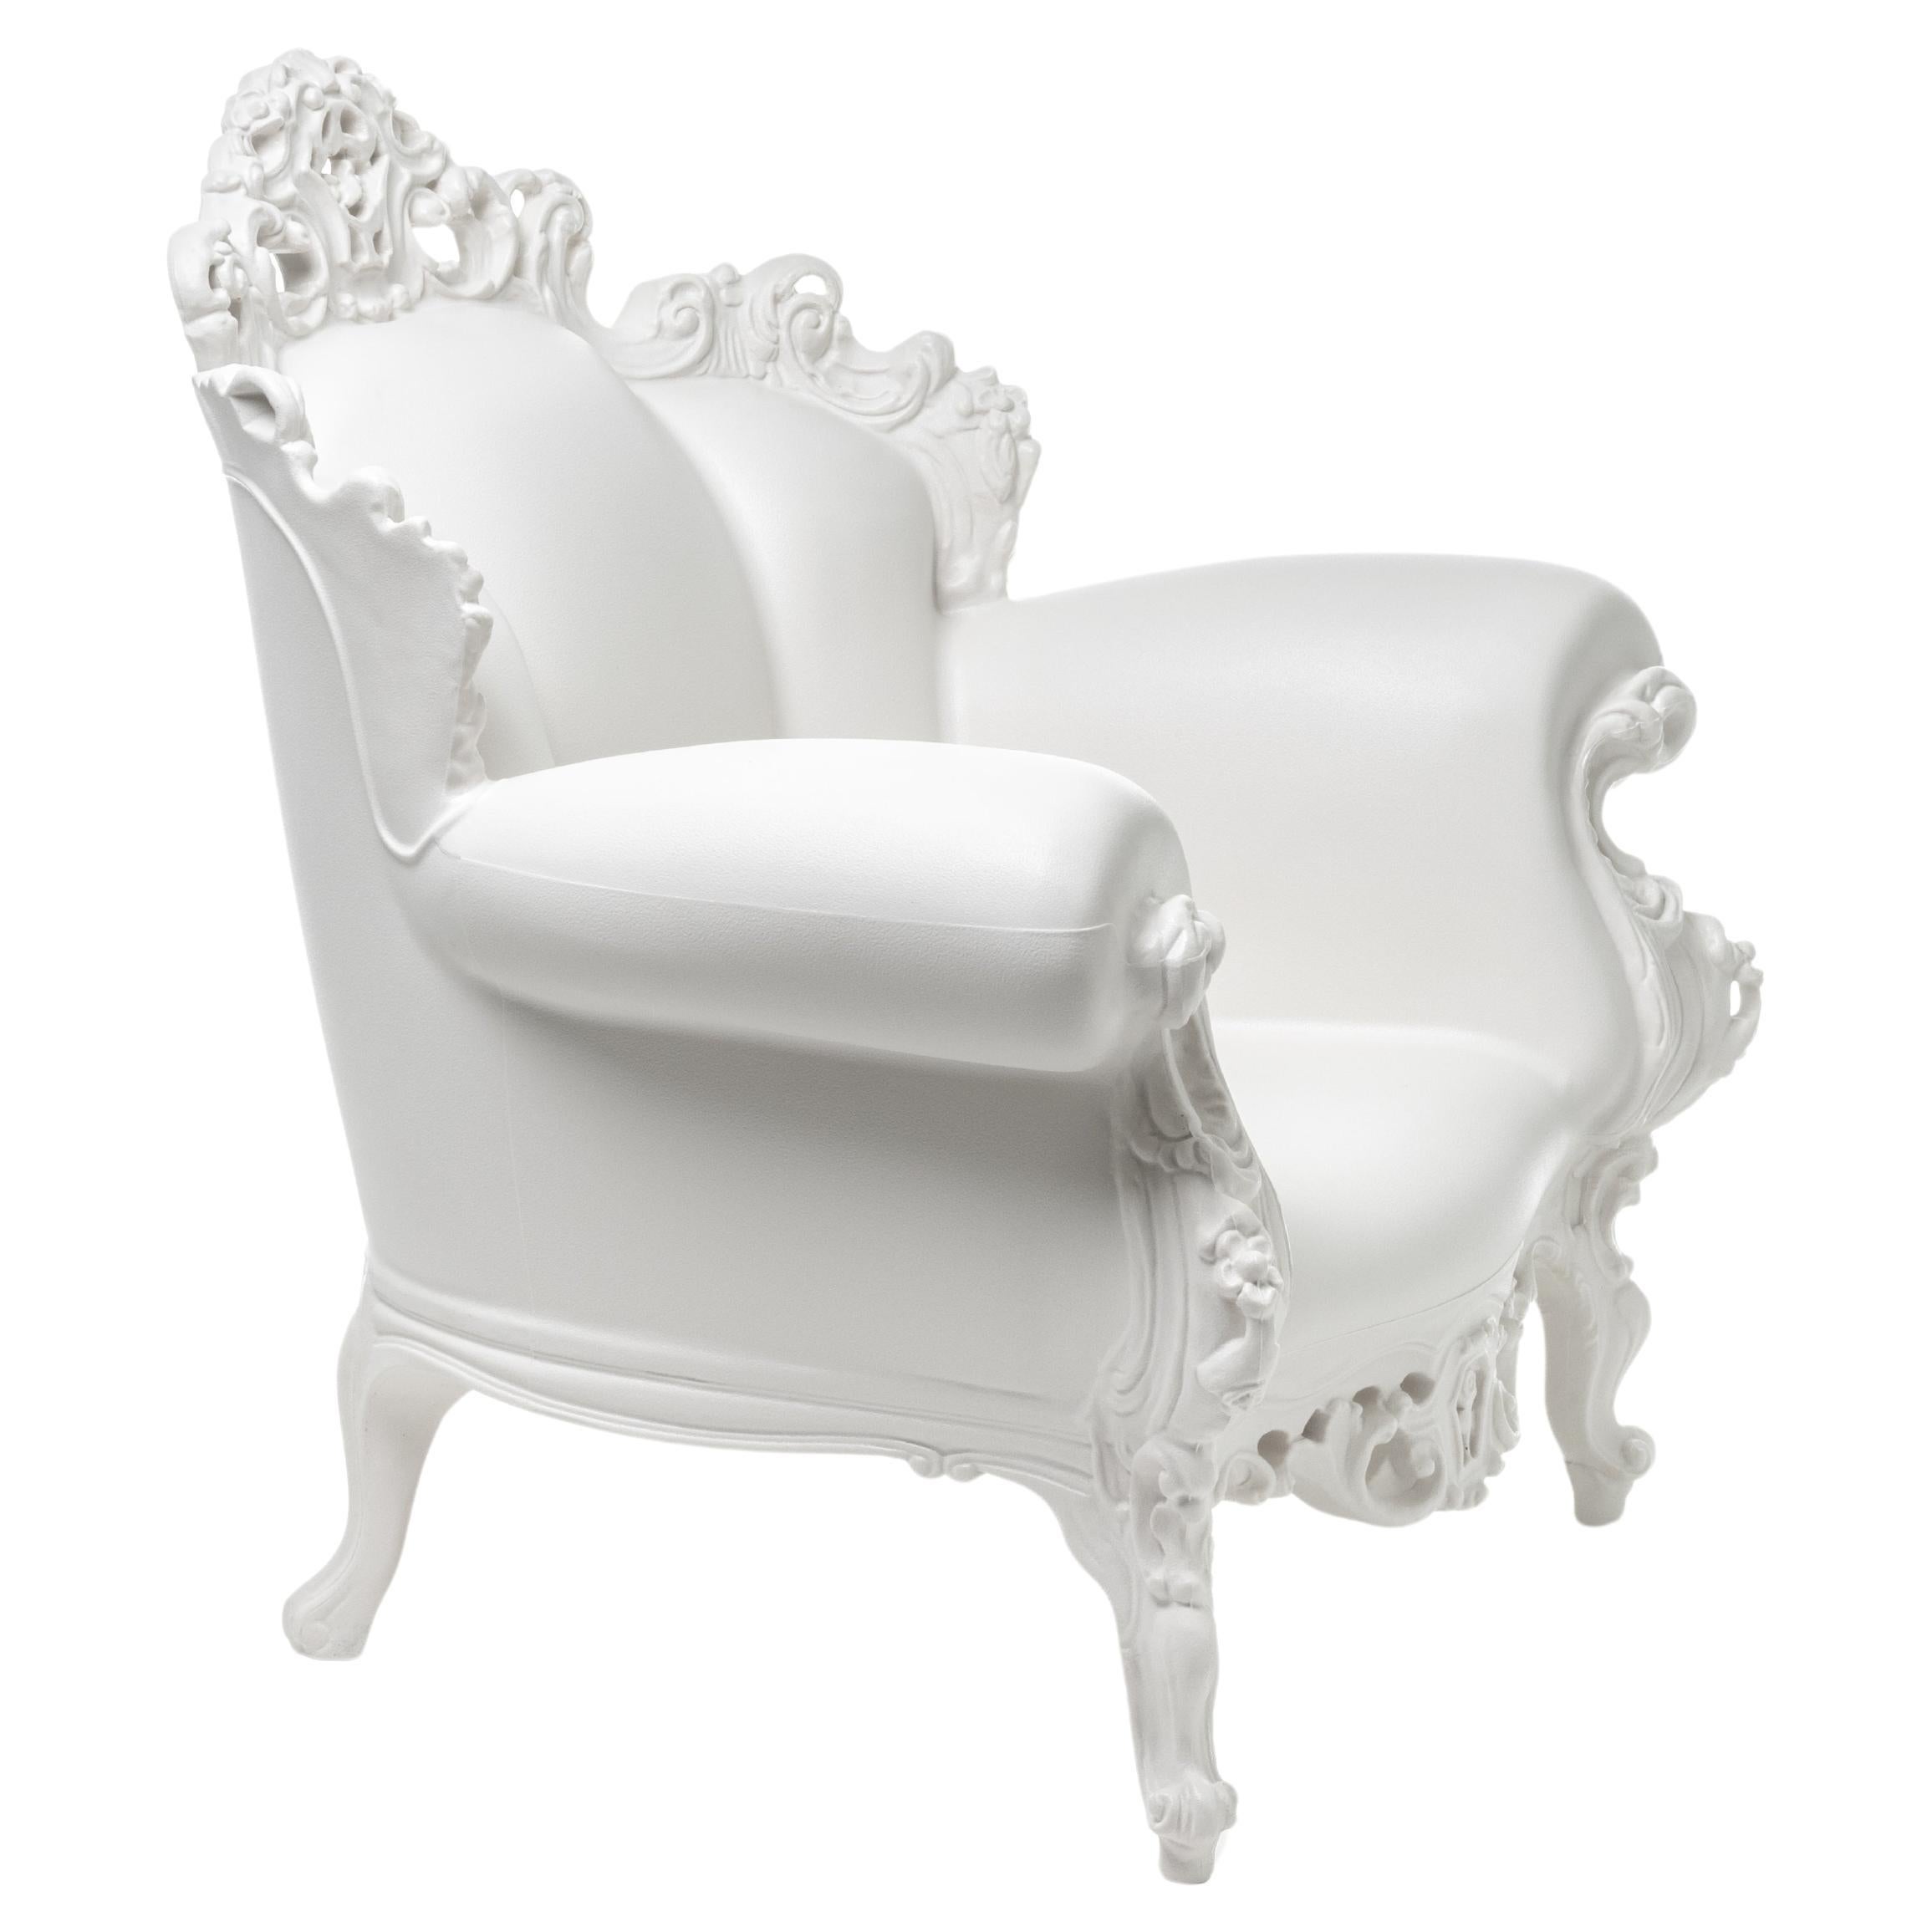 Magis Proust LowChair in White by Alessandro Mendini For Sale